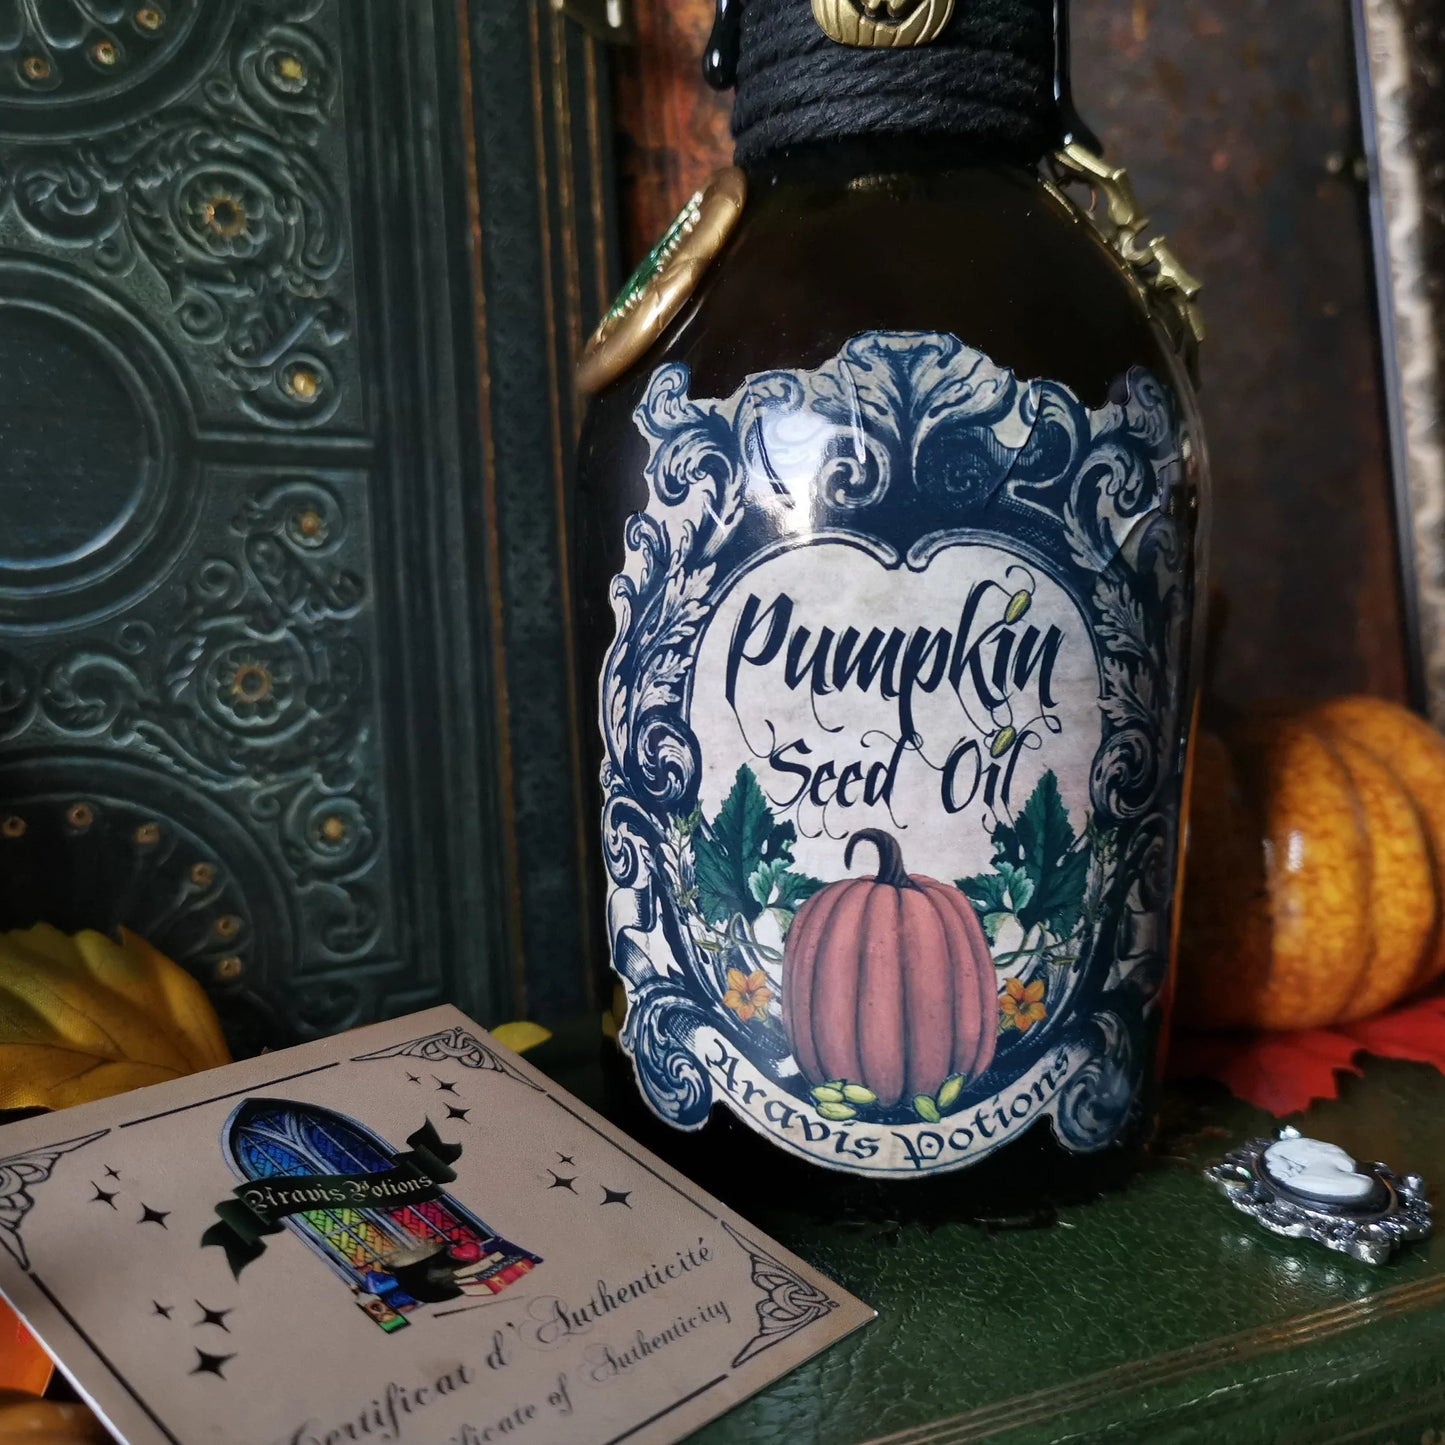 Pumpkin Seed Oil Aravis Potions Apothecary Harry Potter